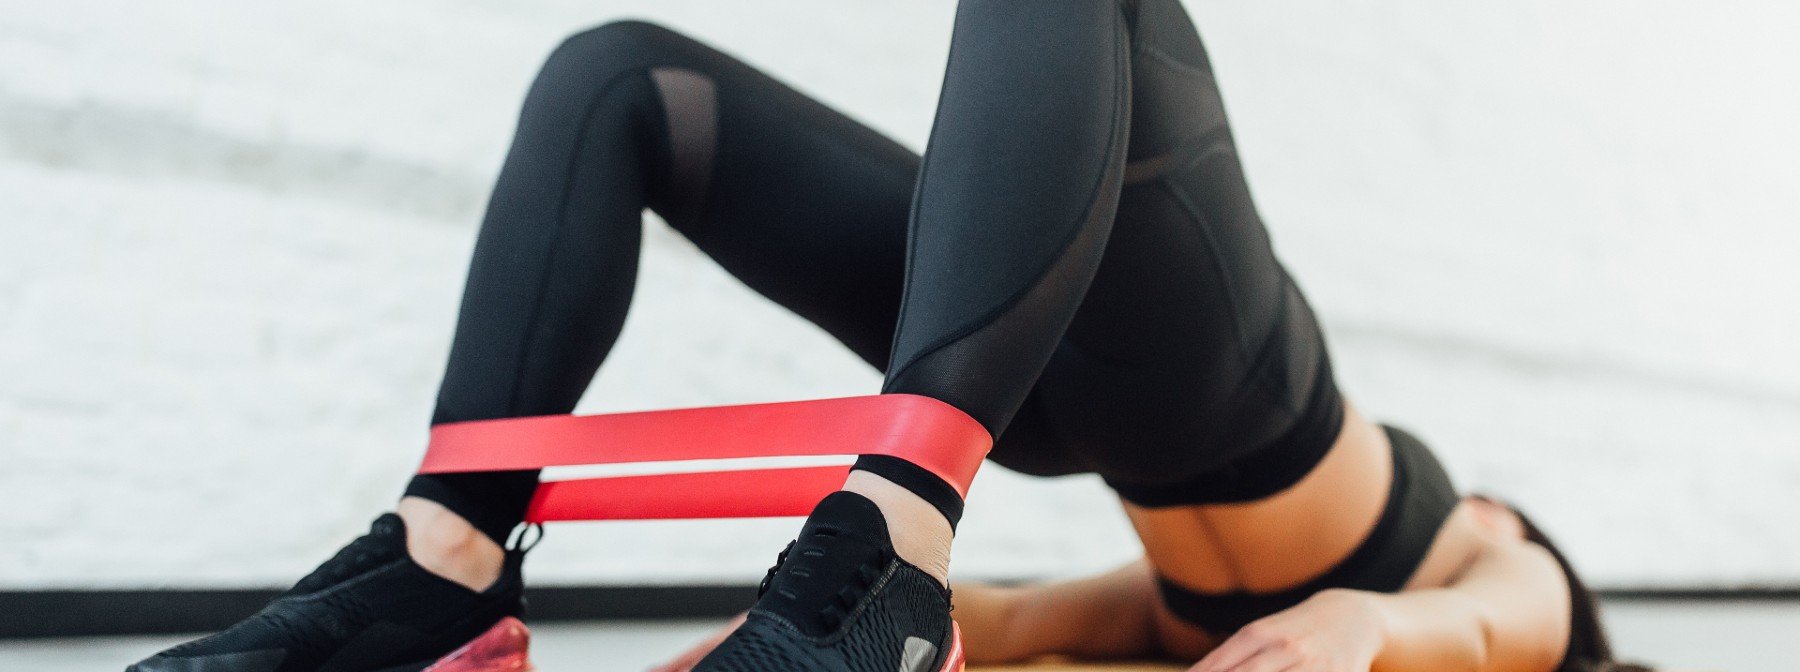 Can I Grow My Glutes With A Resistance Band? | Your Questions Answered